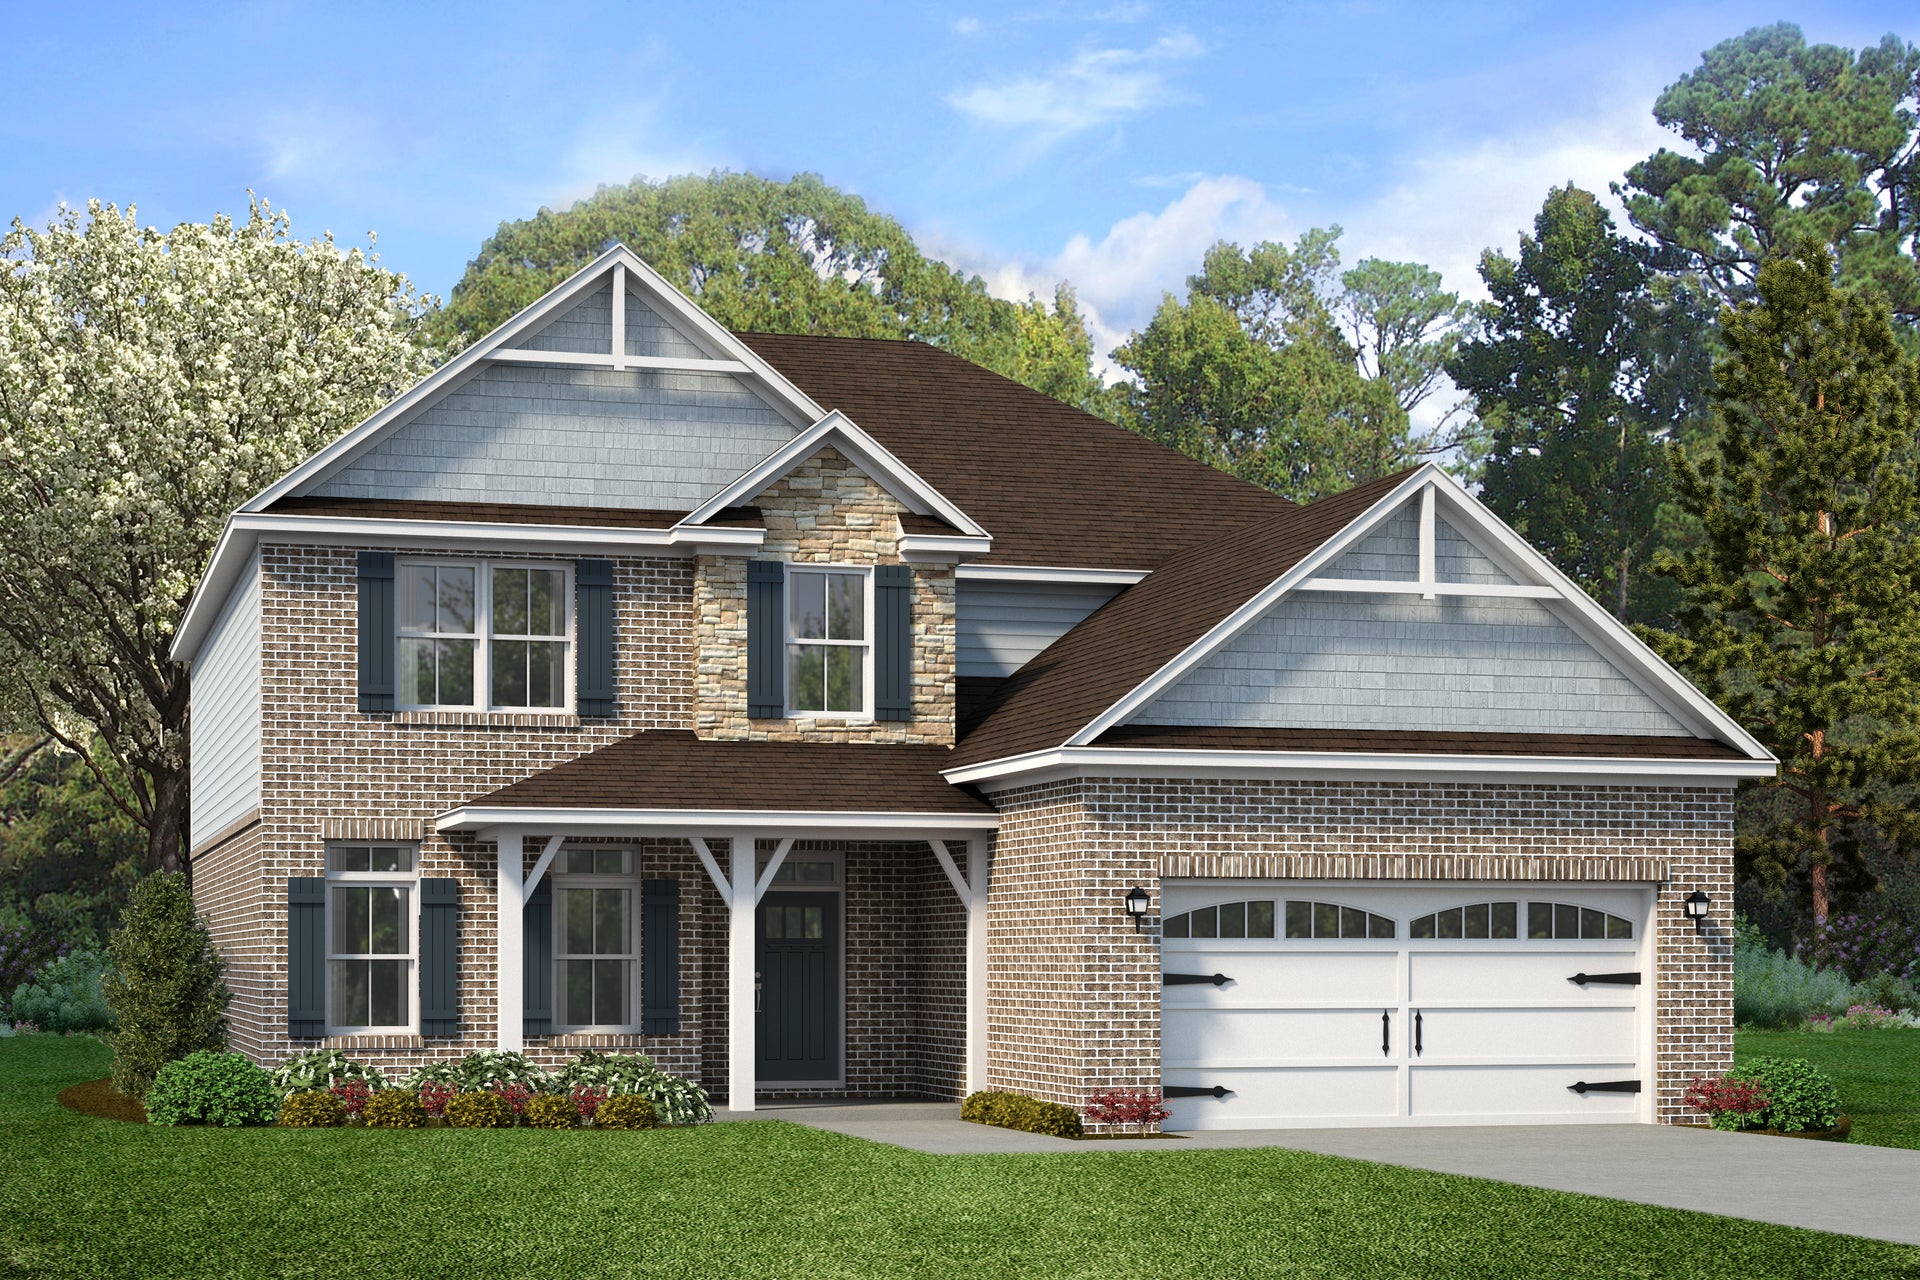 Elevation C. 3,482sf New Home